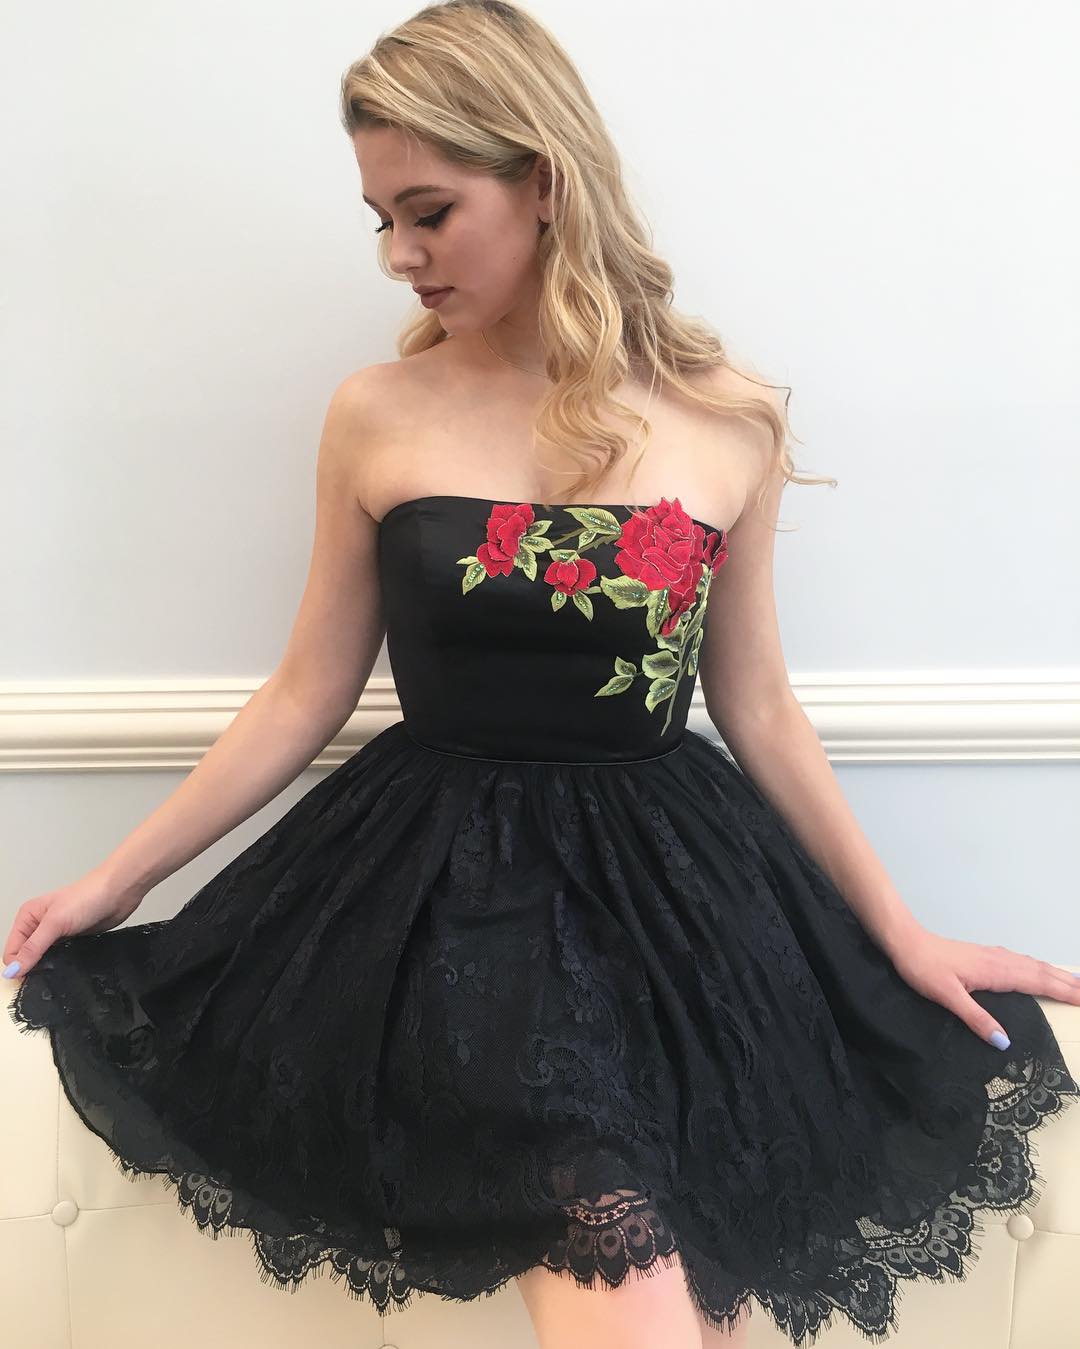 black dress with red roses prom